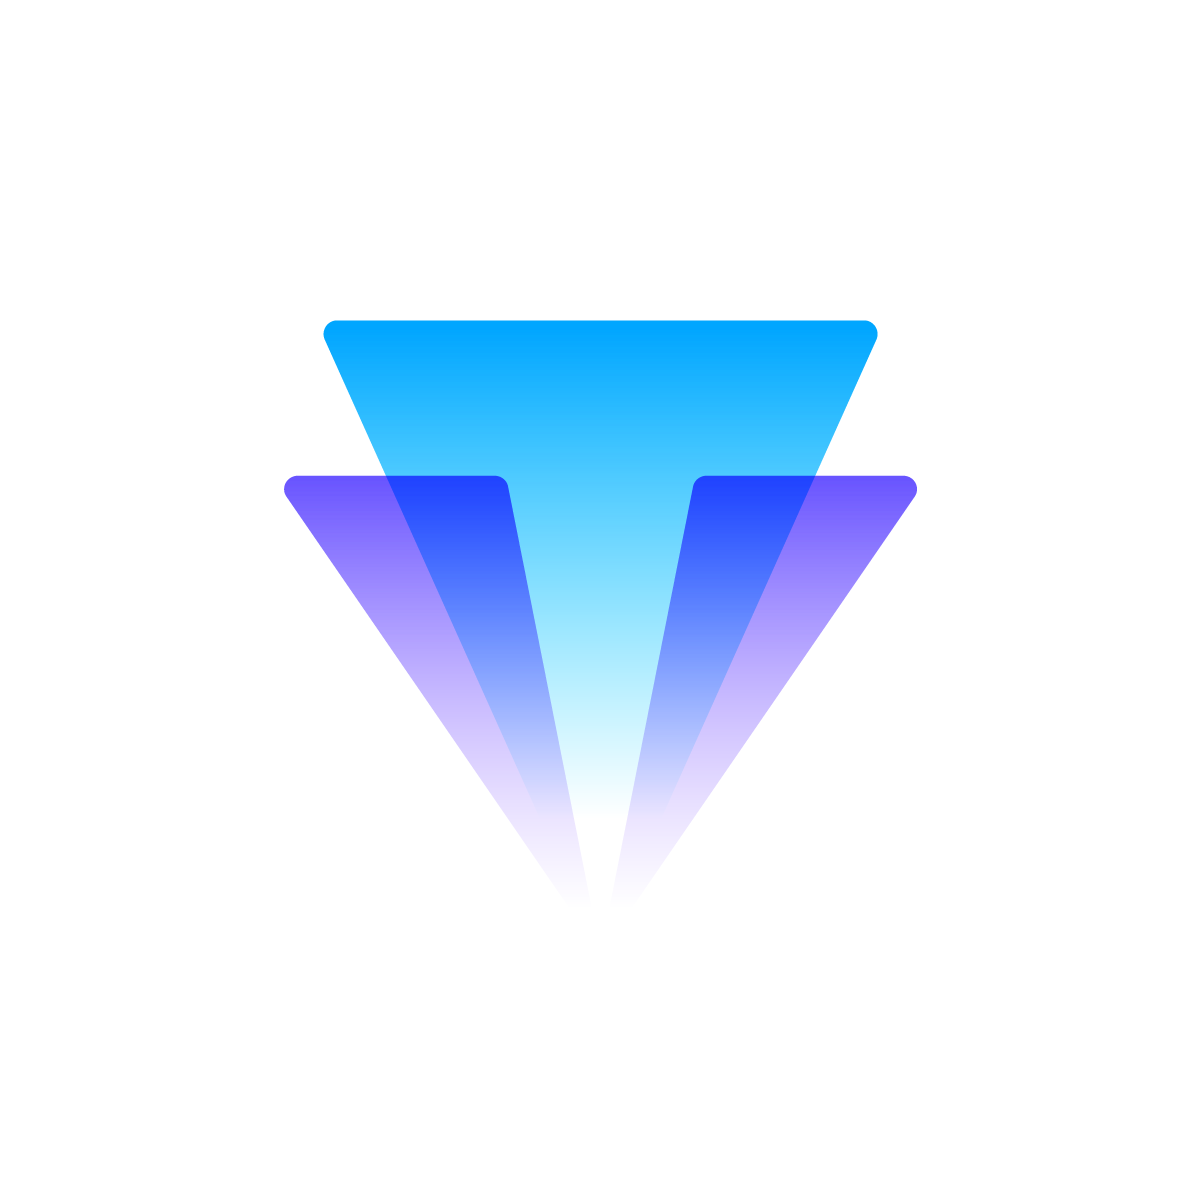 Logo with 3 triangles forming the letter 'T,' symbolizing speed and transparency, tailored for cryptocurrency startups.